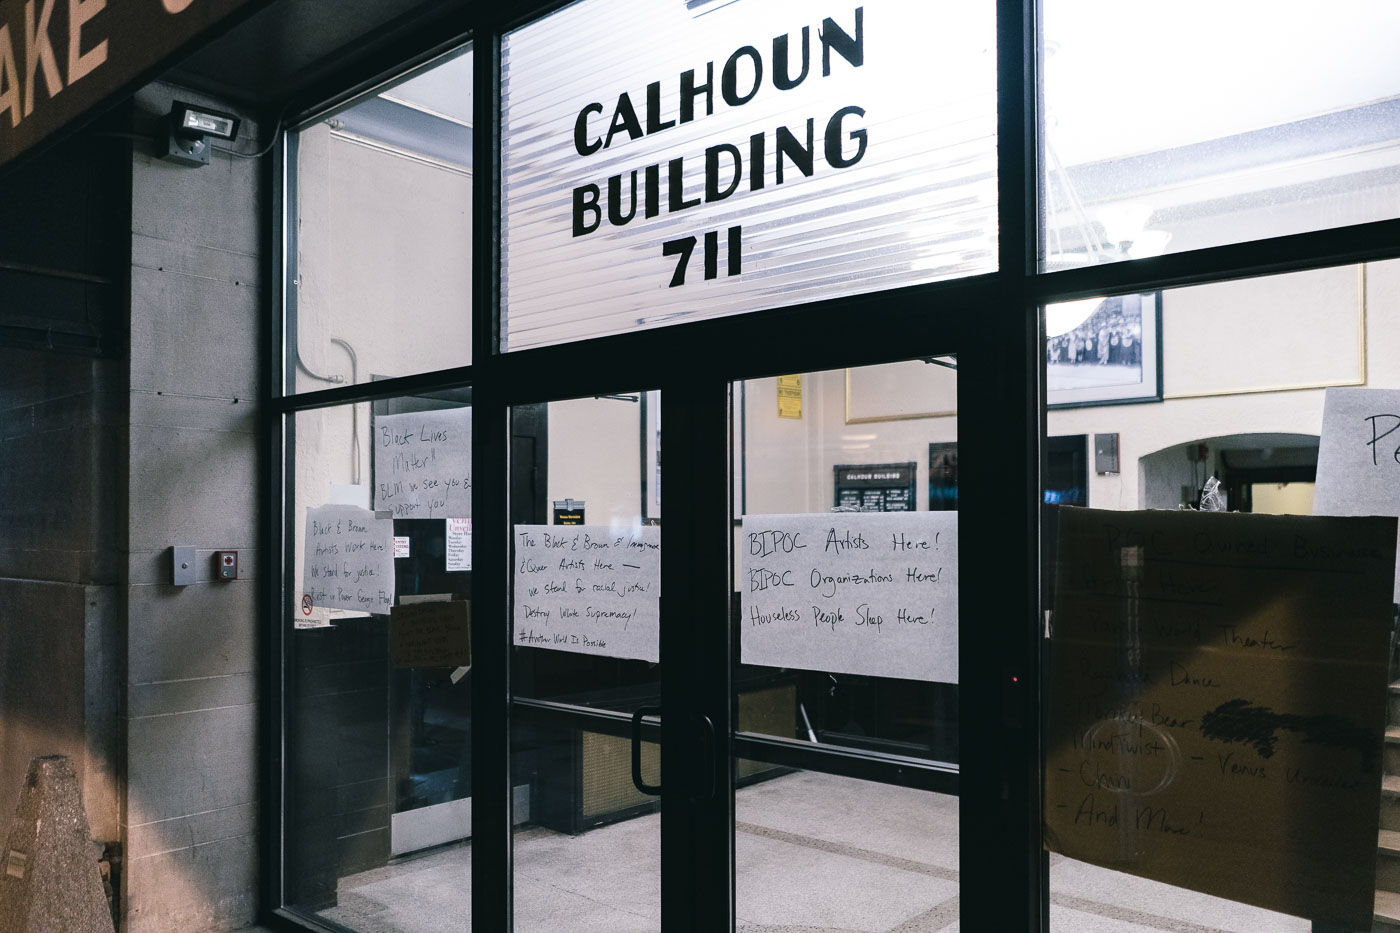 Calhoun Building with BIPOC signs on door